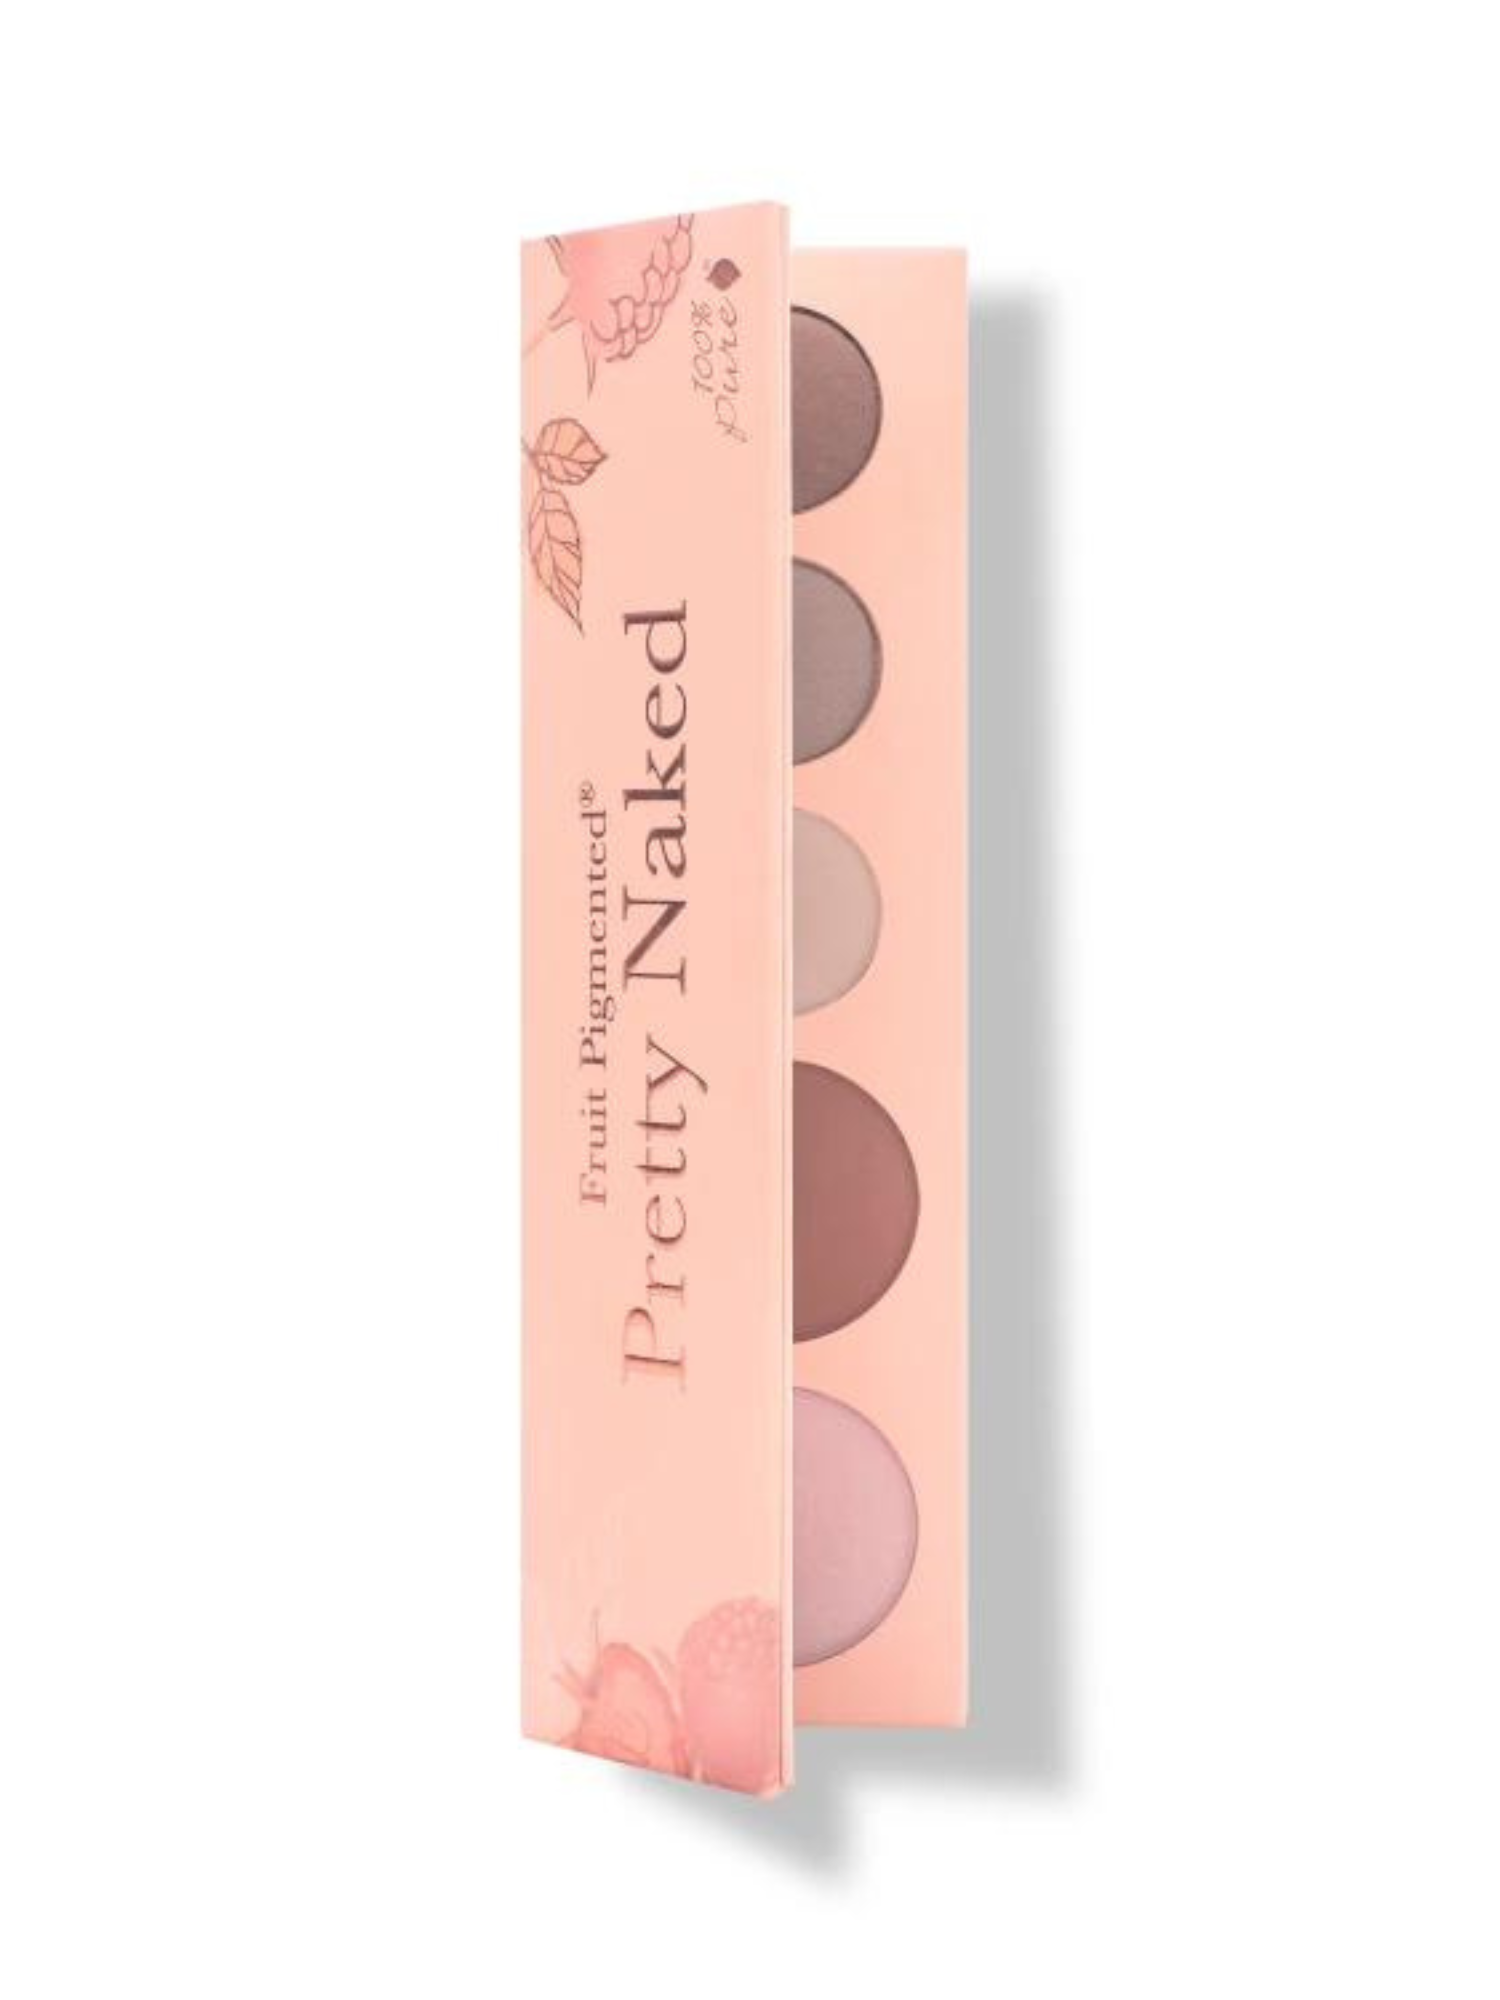 Fruit Pigmented Pretty Naked Palette